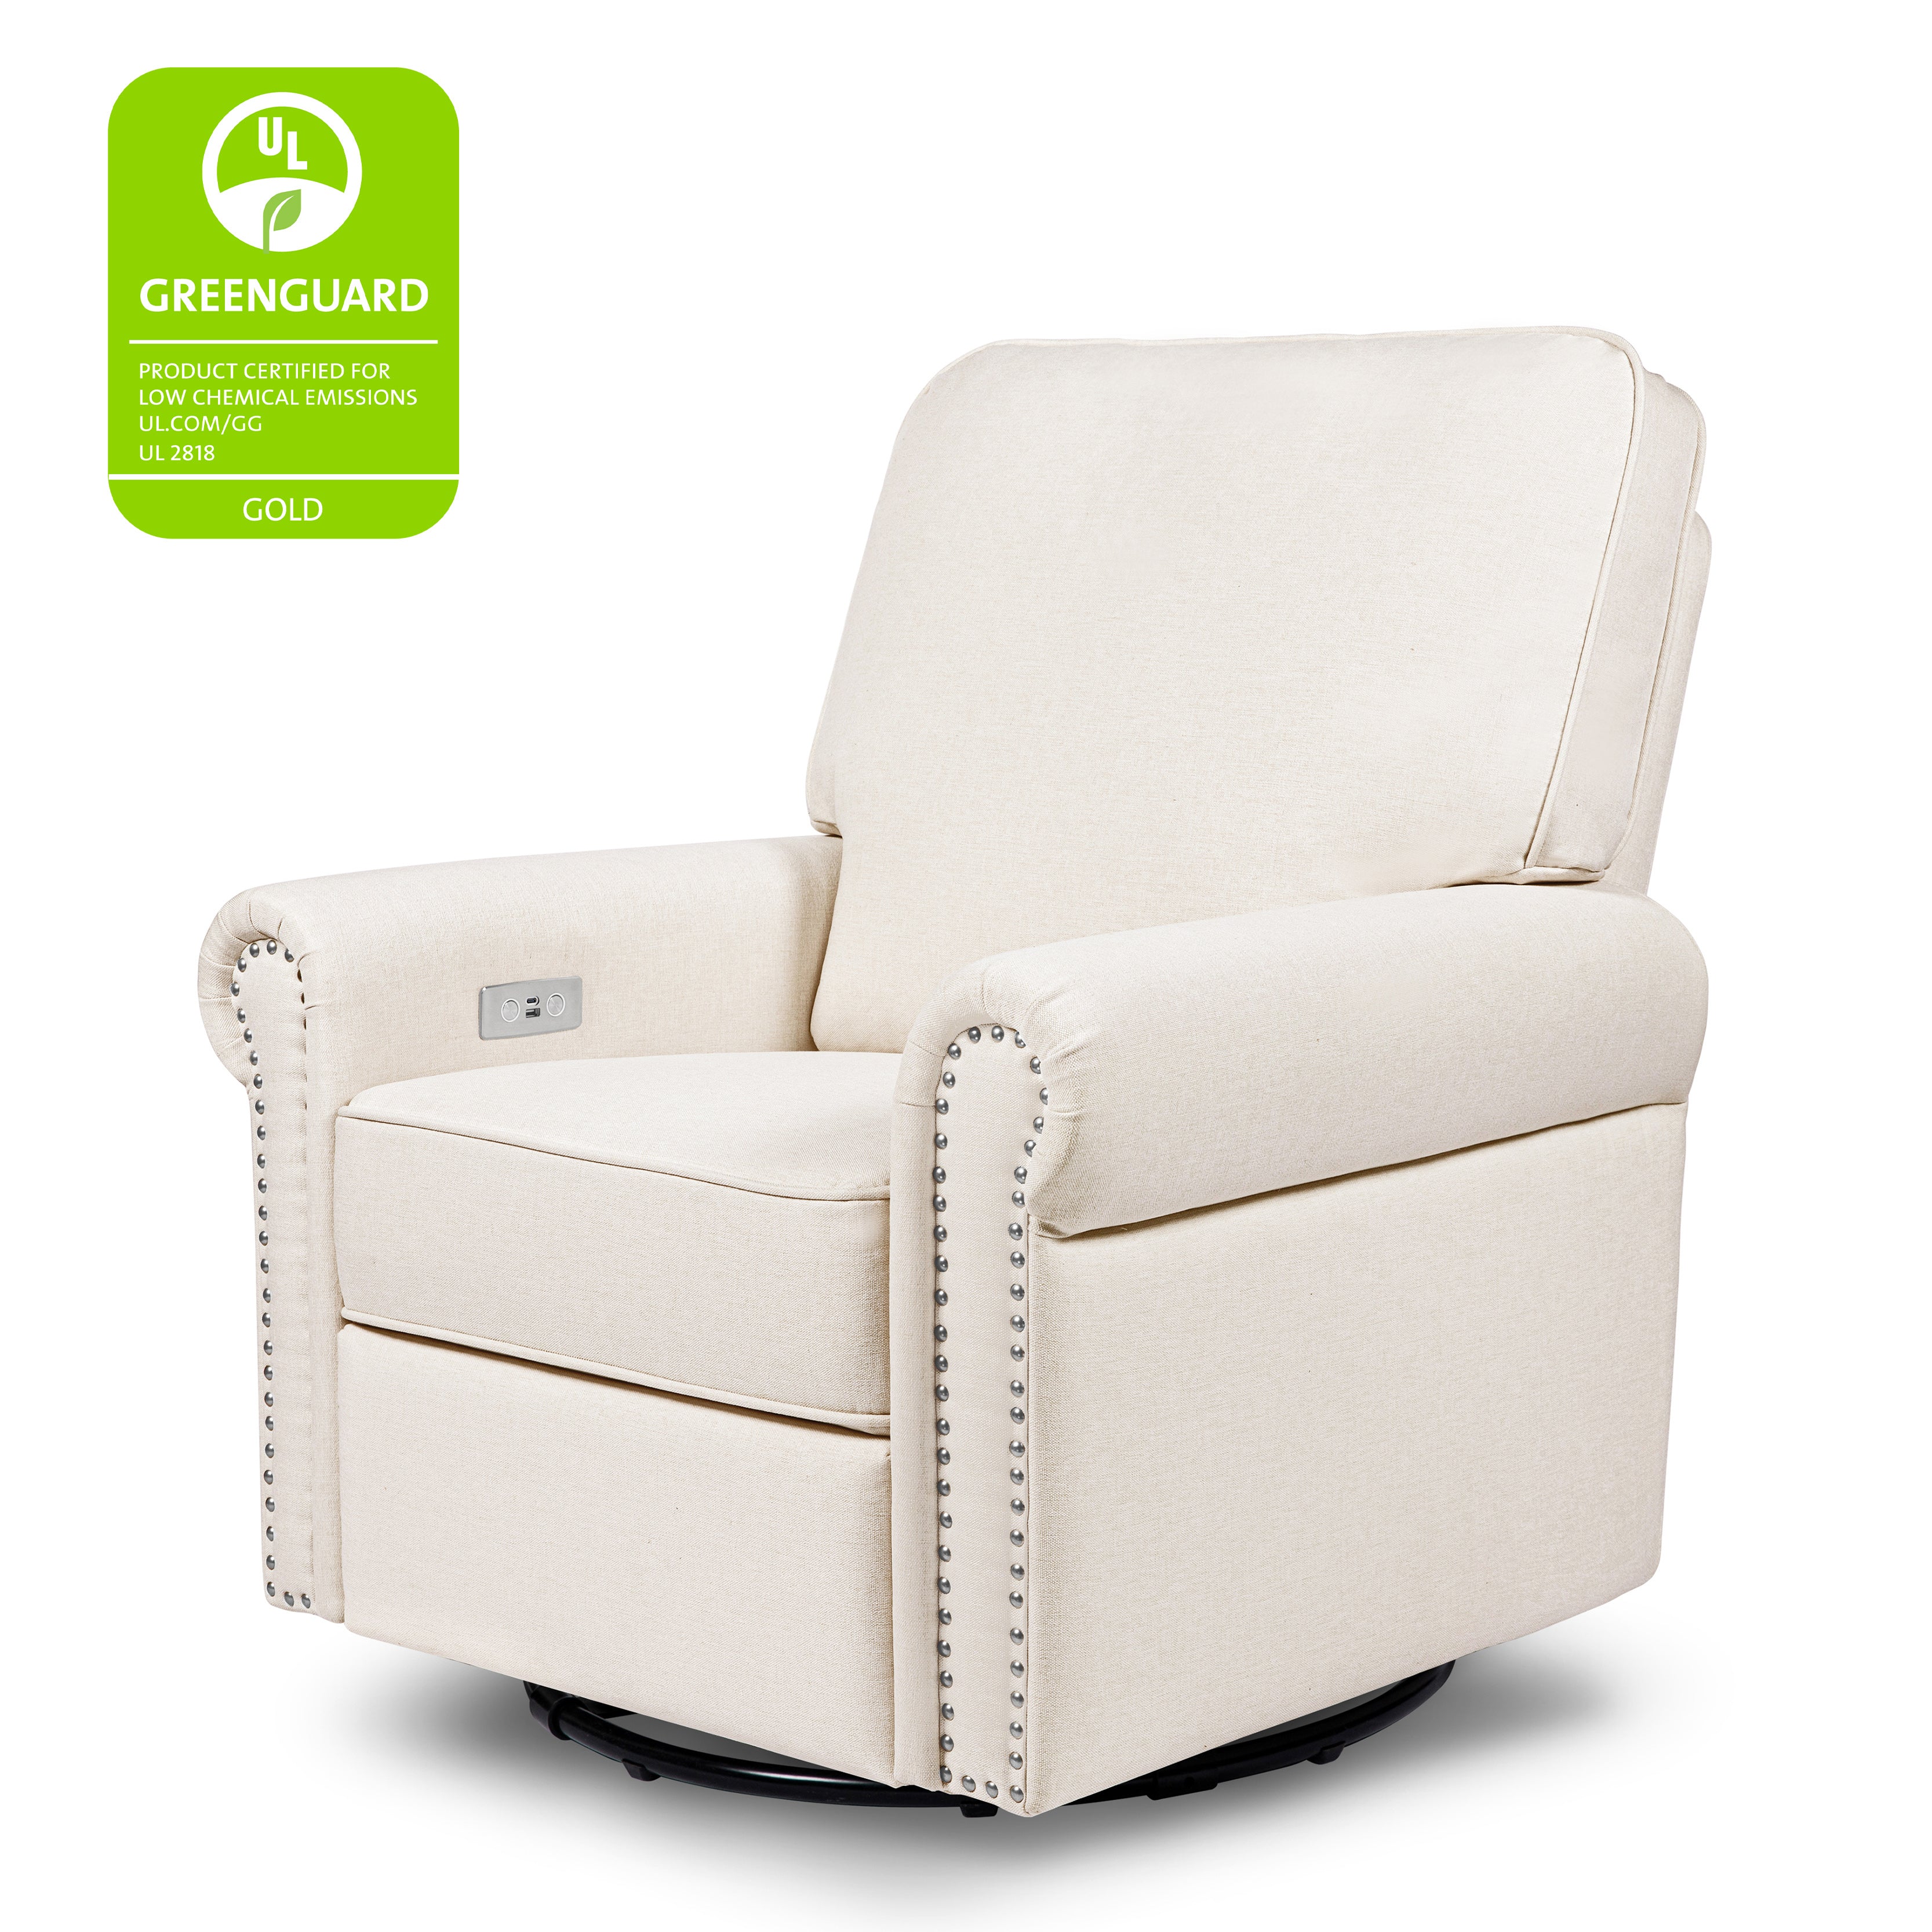 Namesake Linden Electronic Recliner and Swivel Glider in Eco-Performance Fabric with USB port